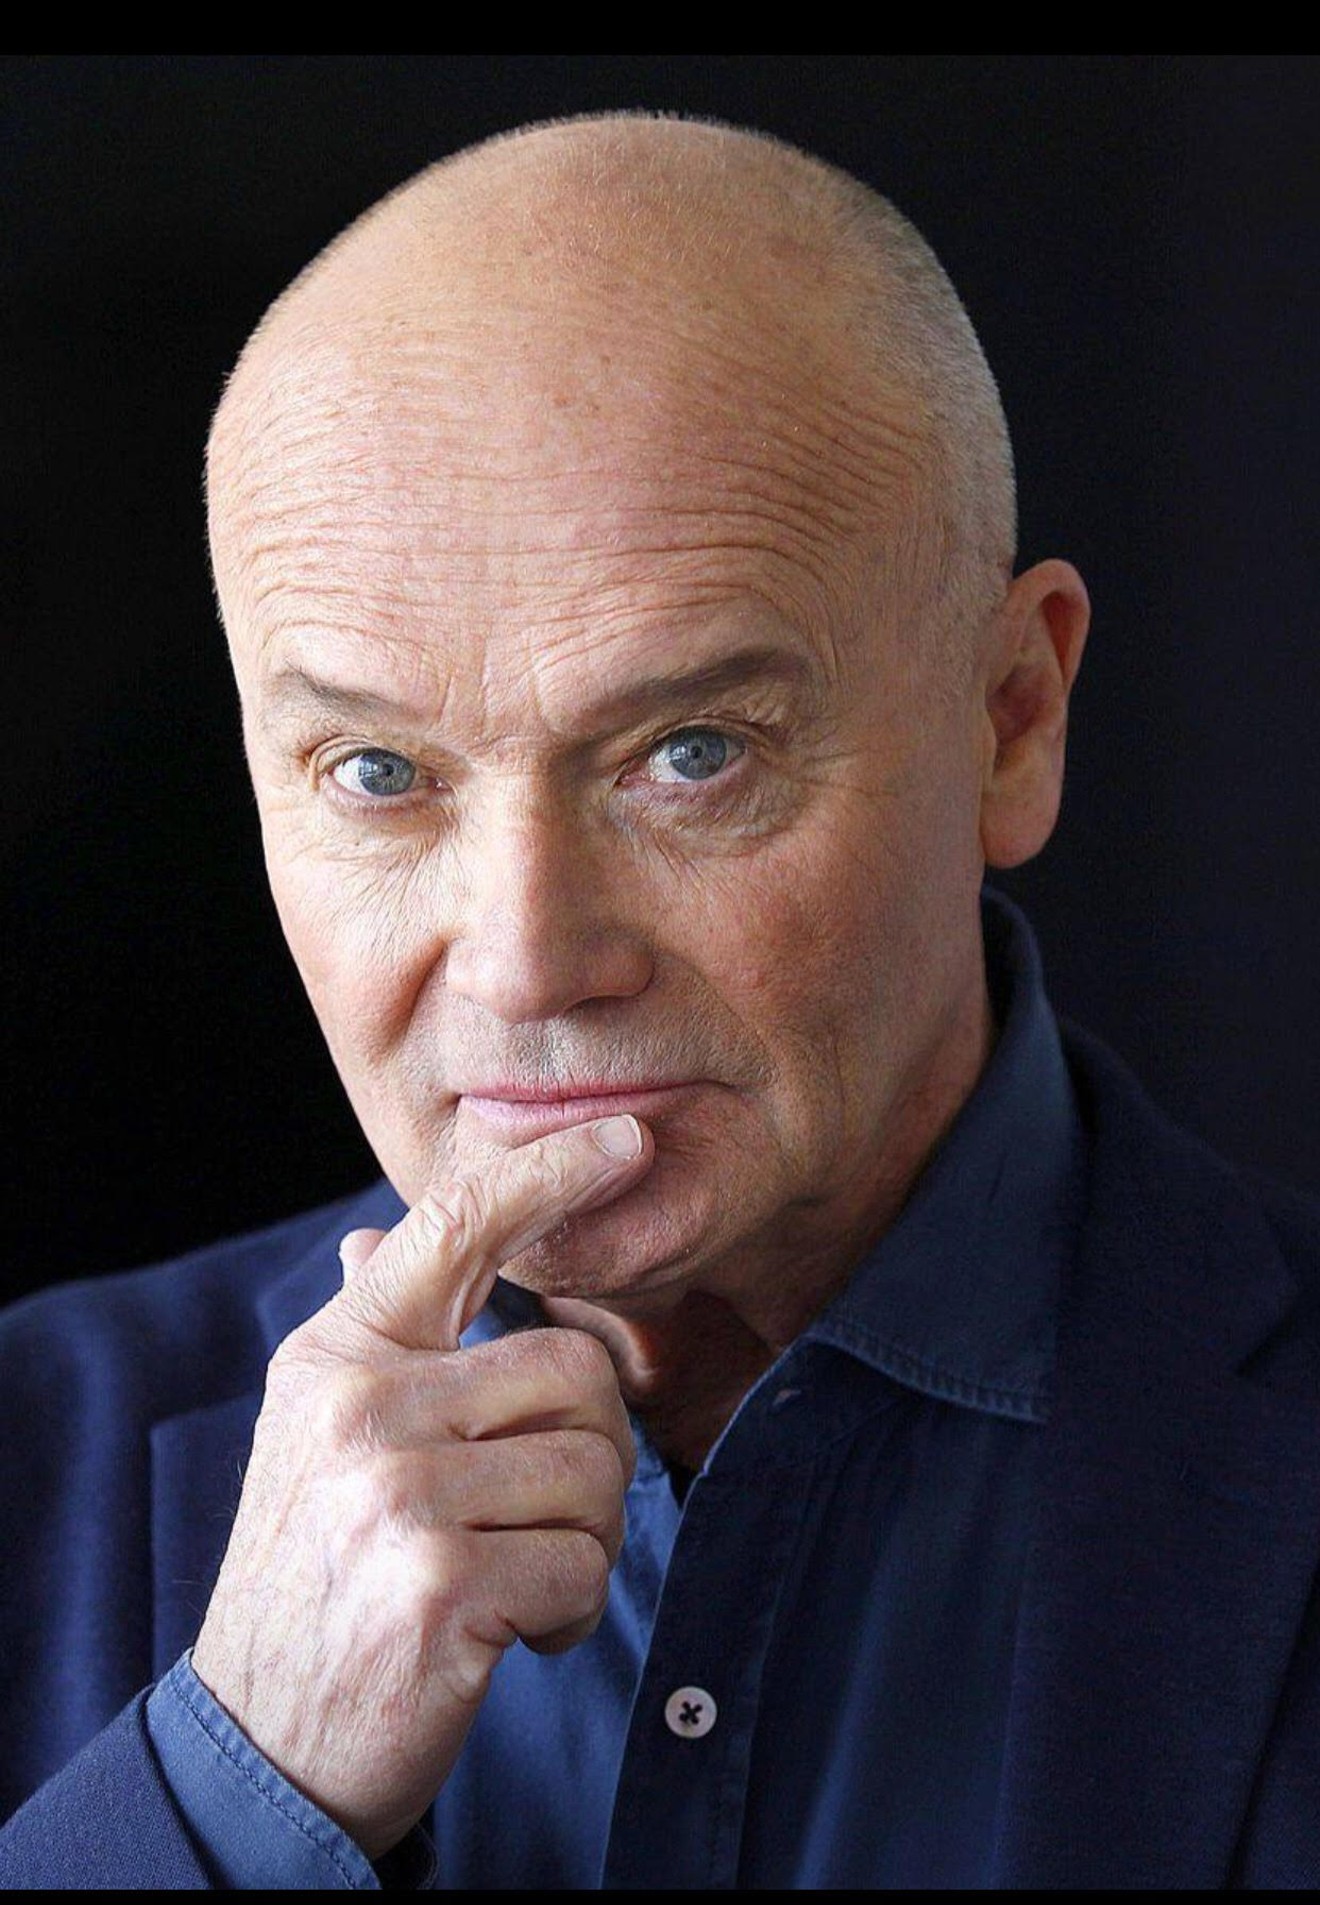 Creed Bratton acts, sings and hunts ghosts.